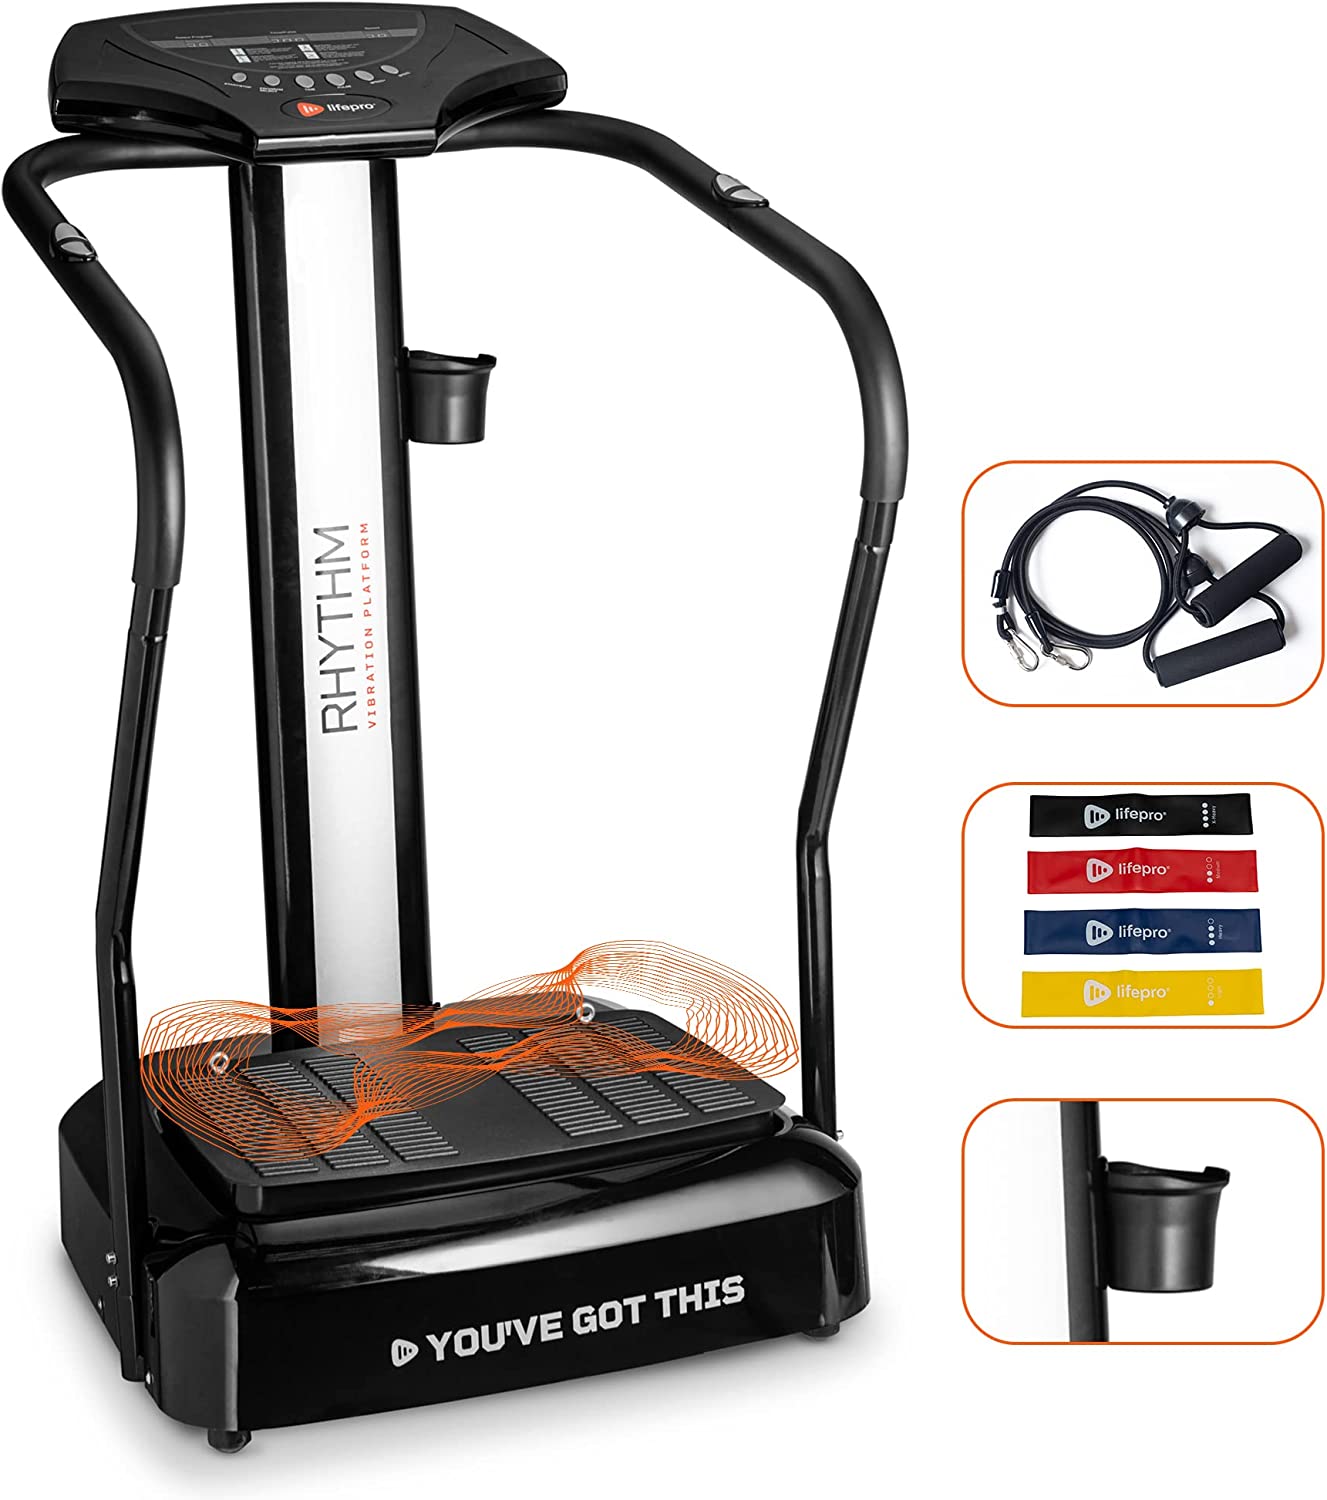 Lifepro Rhythm Vibration Plate Workout Machine Review The Pros and Cons